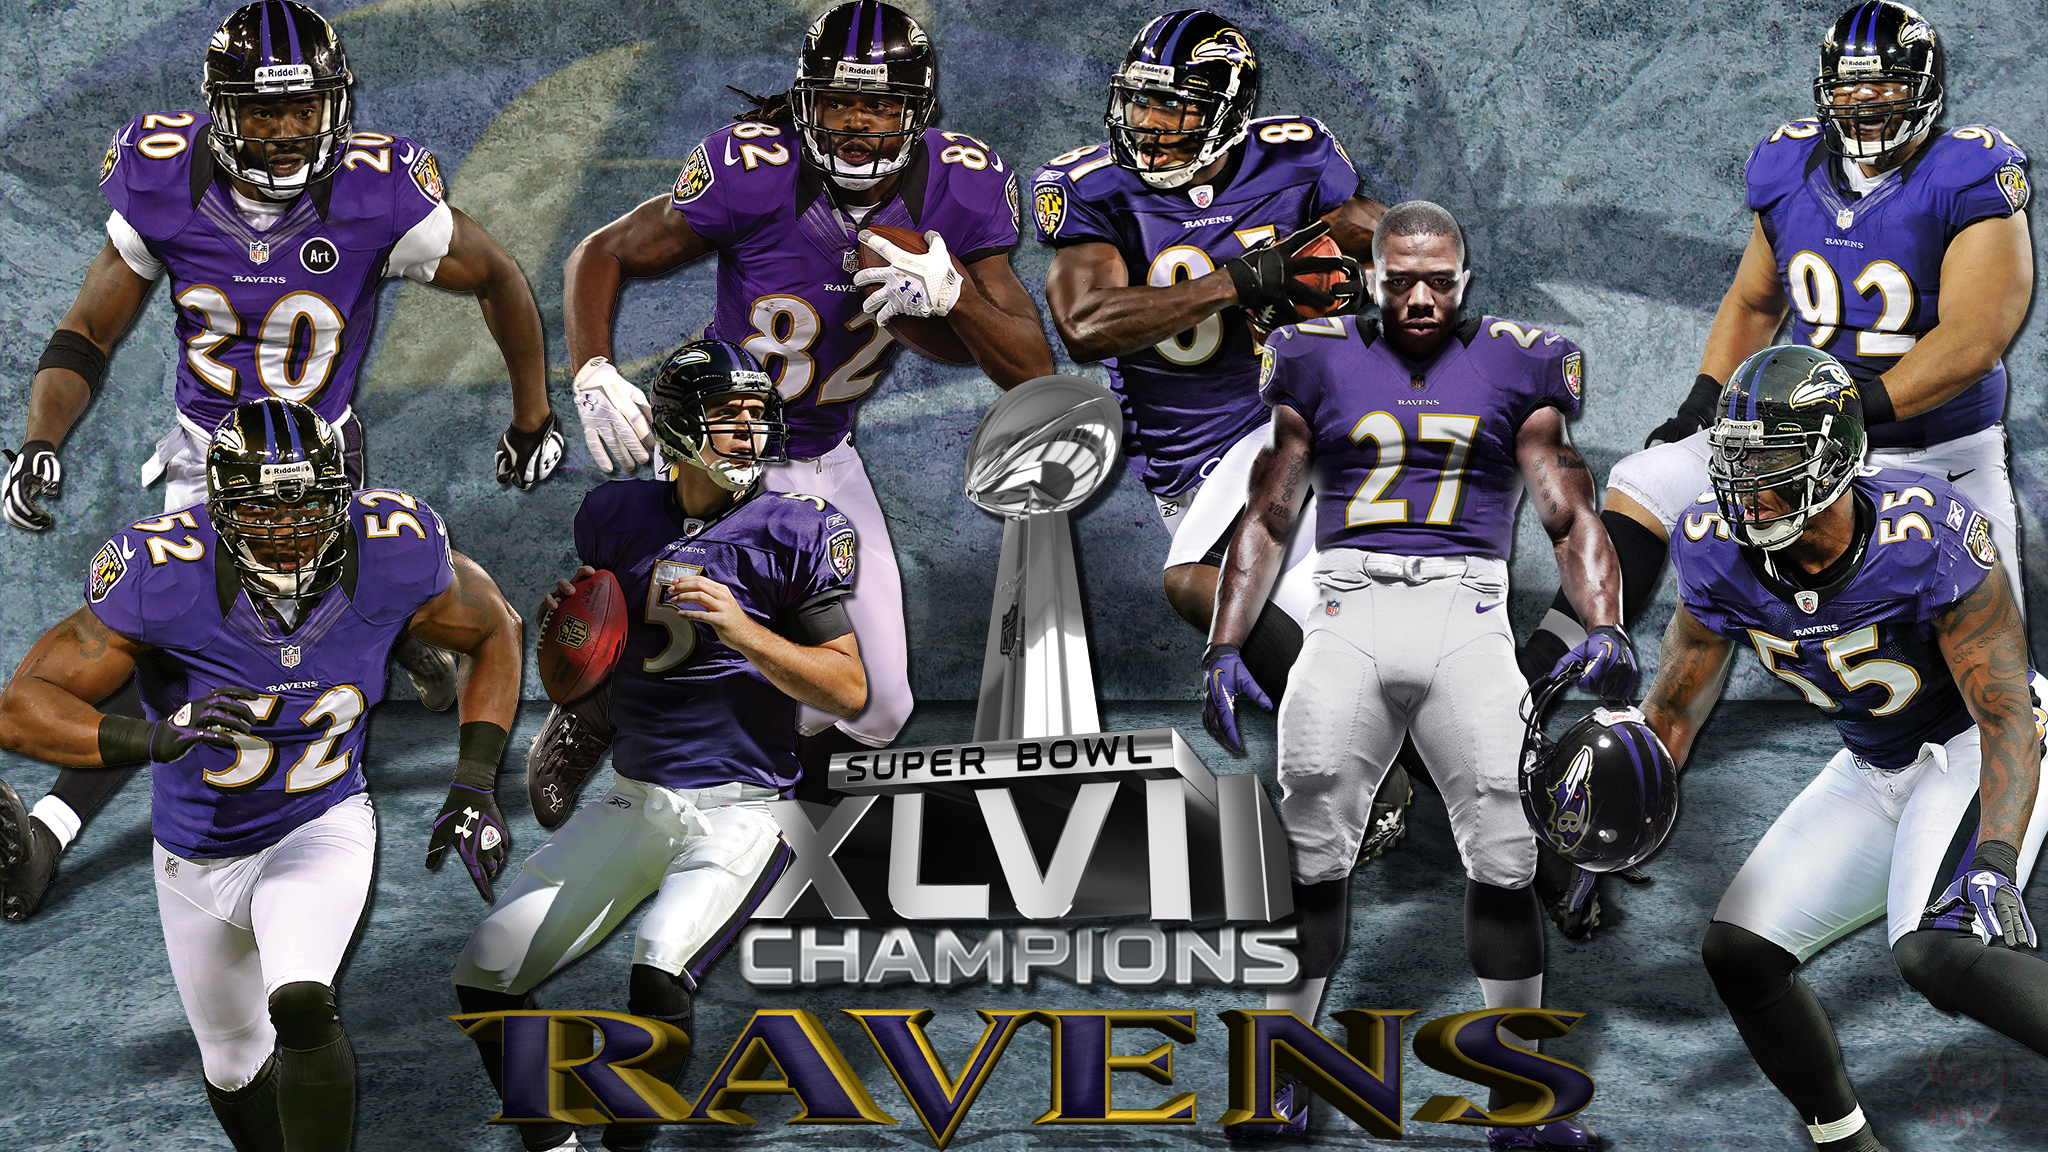 Wallpapers By Wicked Shadows: Baltimore Ravens Super Bowl XLVII Champions Wallpaper